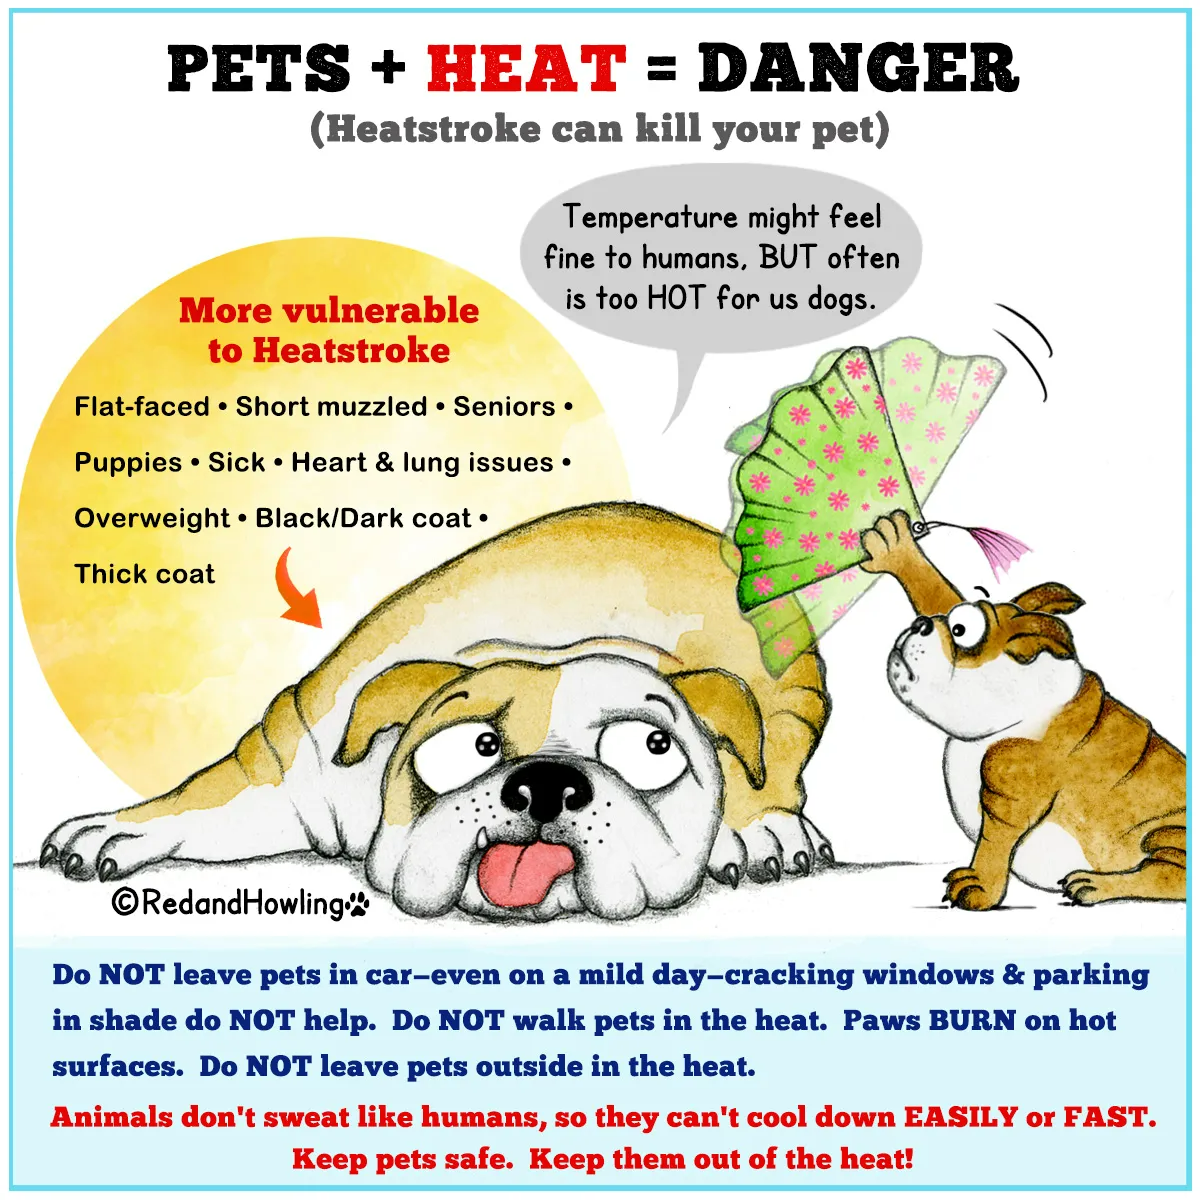 heatstroke in pets red and howling 